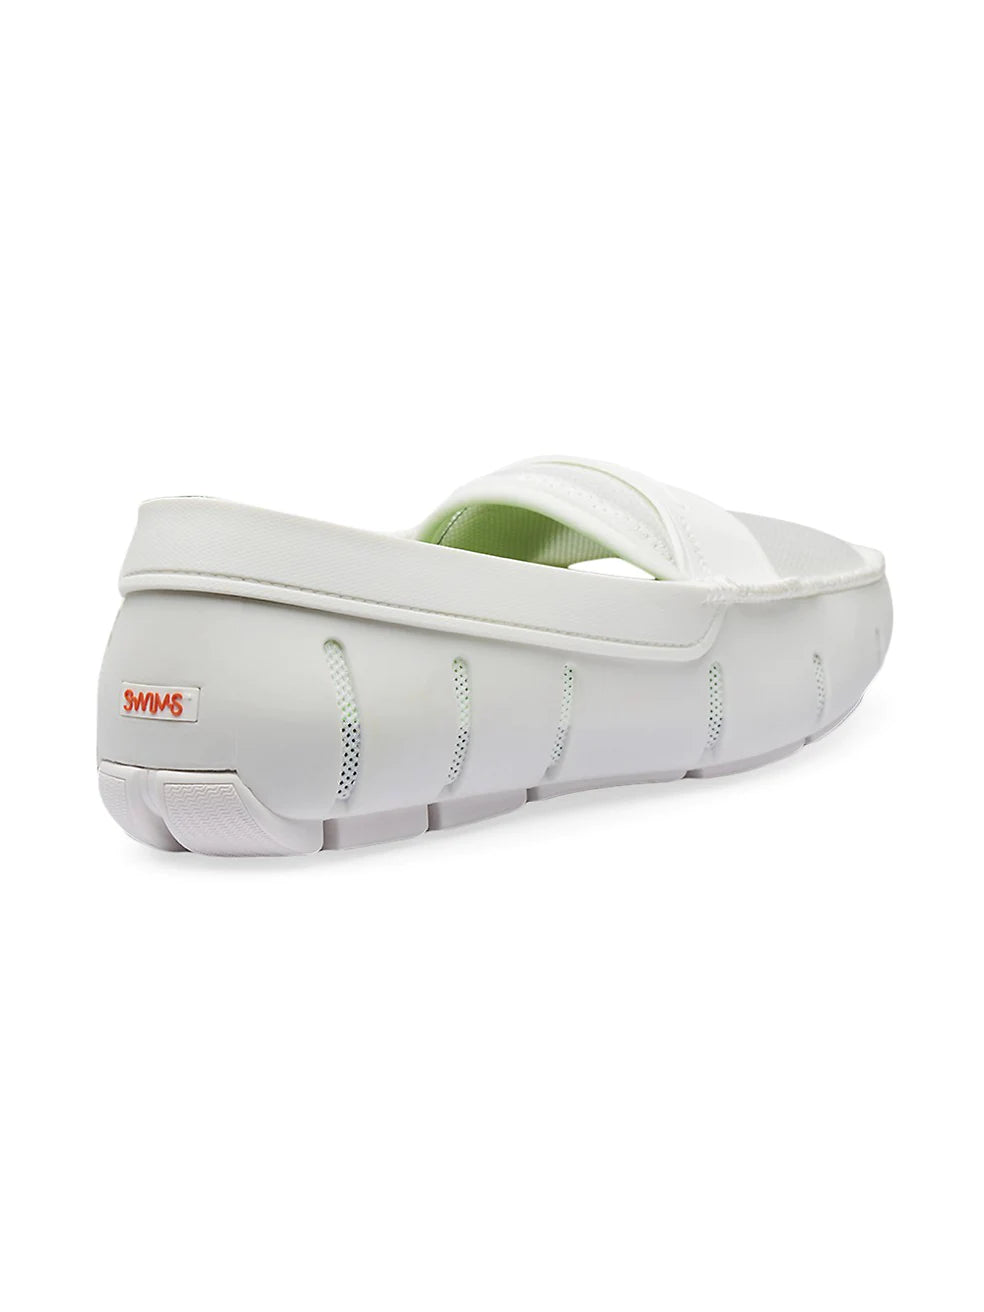 Penny Loafer White - SWIMS